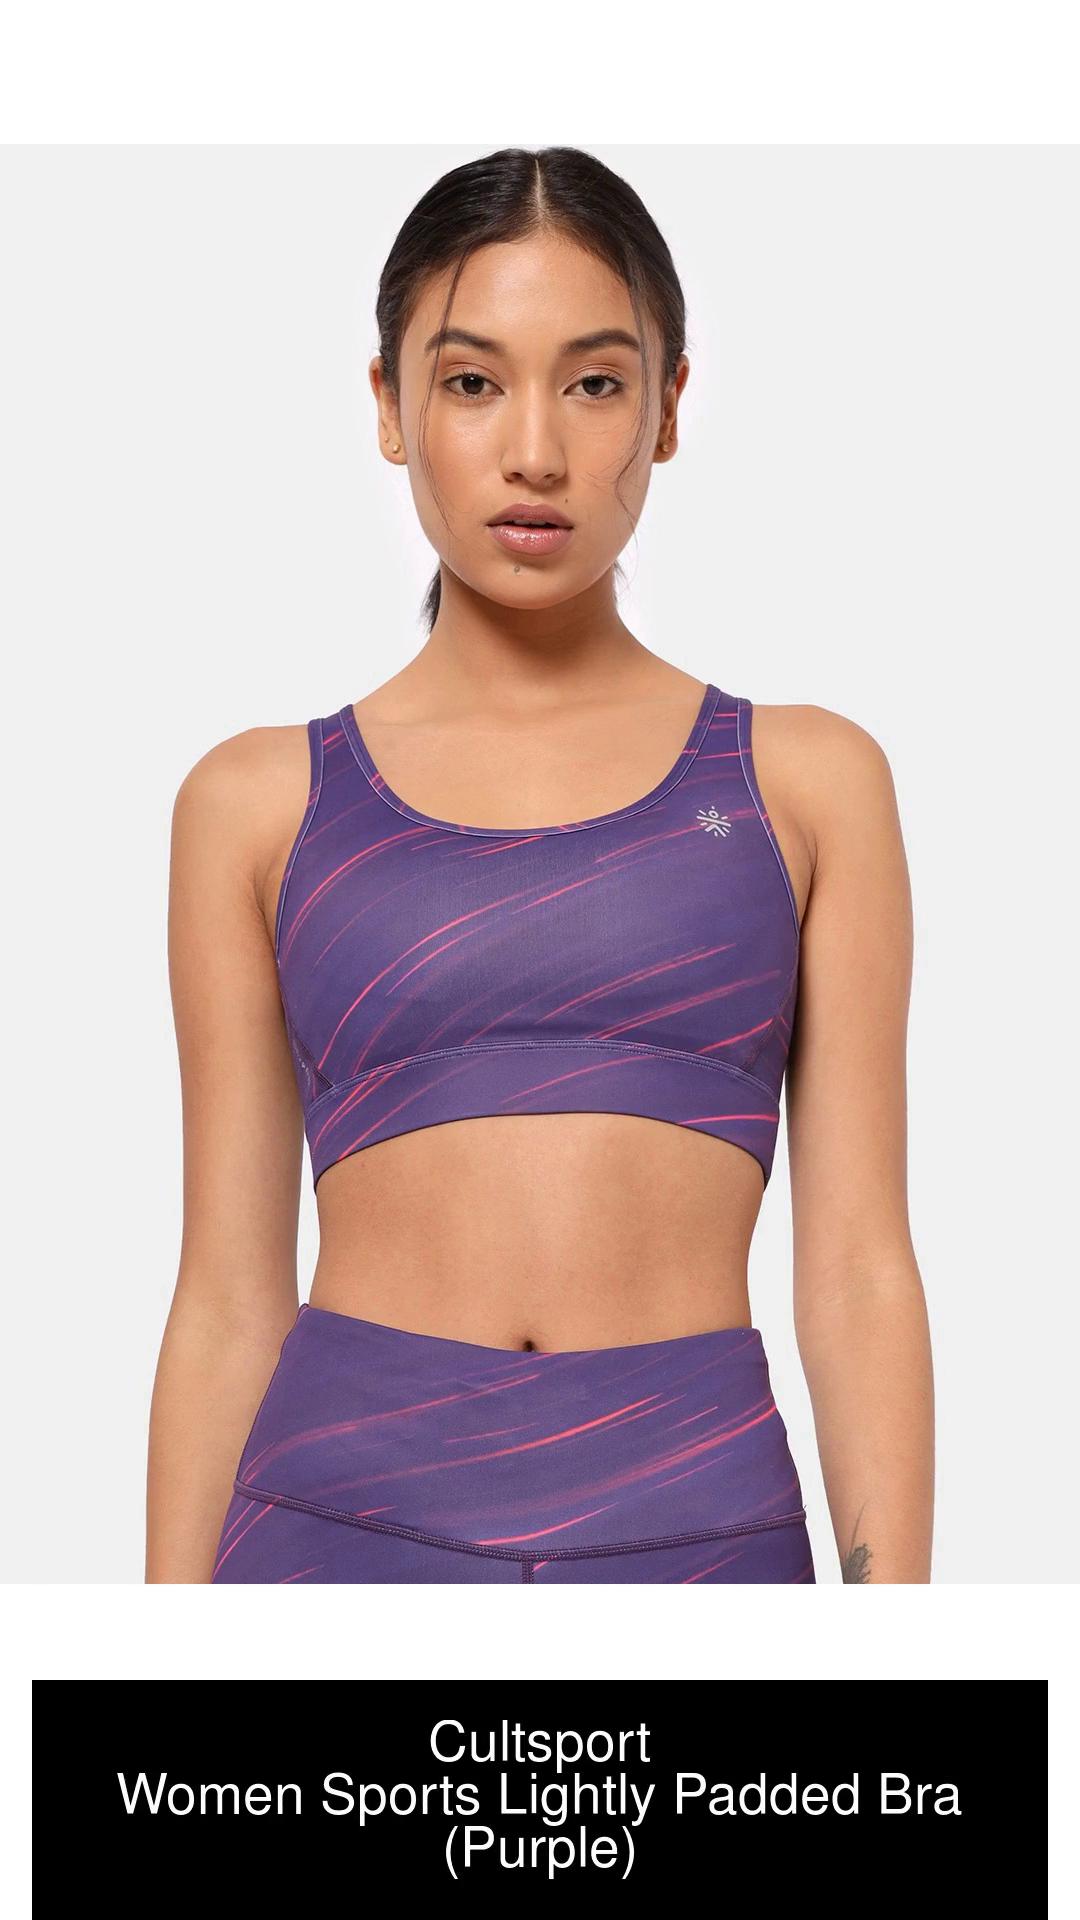 Cultsport Sports Bra Women Sports Lightly Padded Bra - Buy Cultsport Sports  Bra Women Sports Lightly Padded Bra Online at Best Prices in India